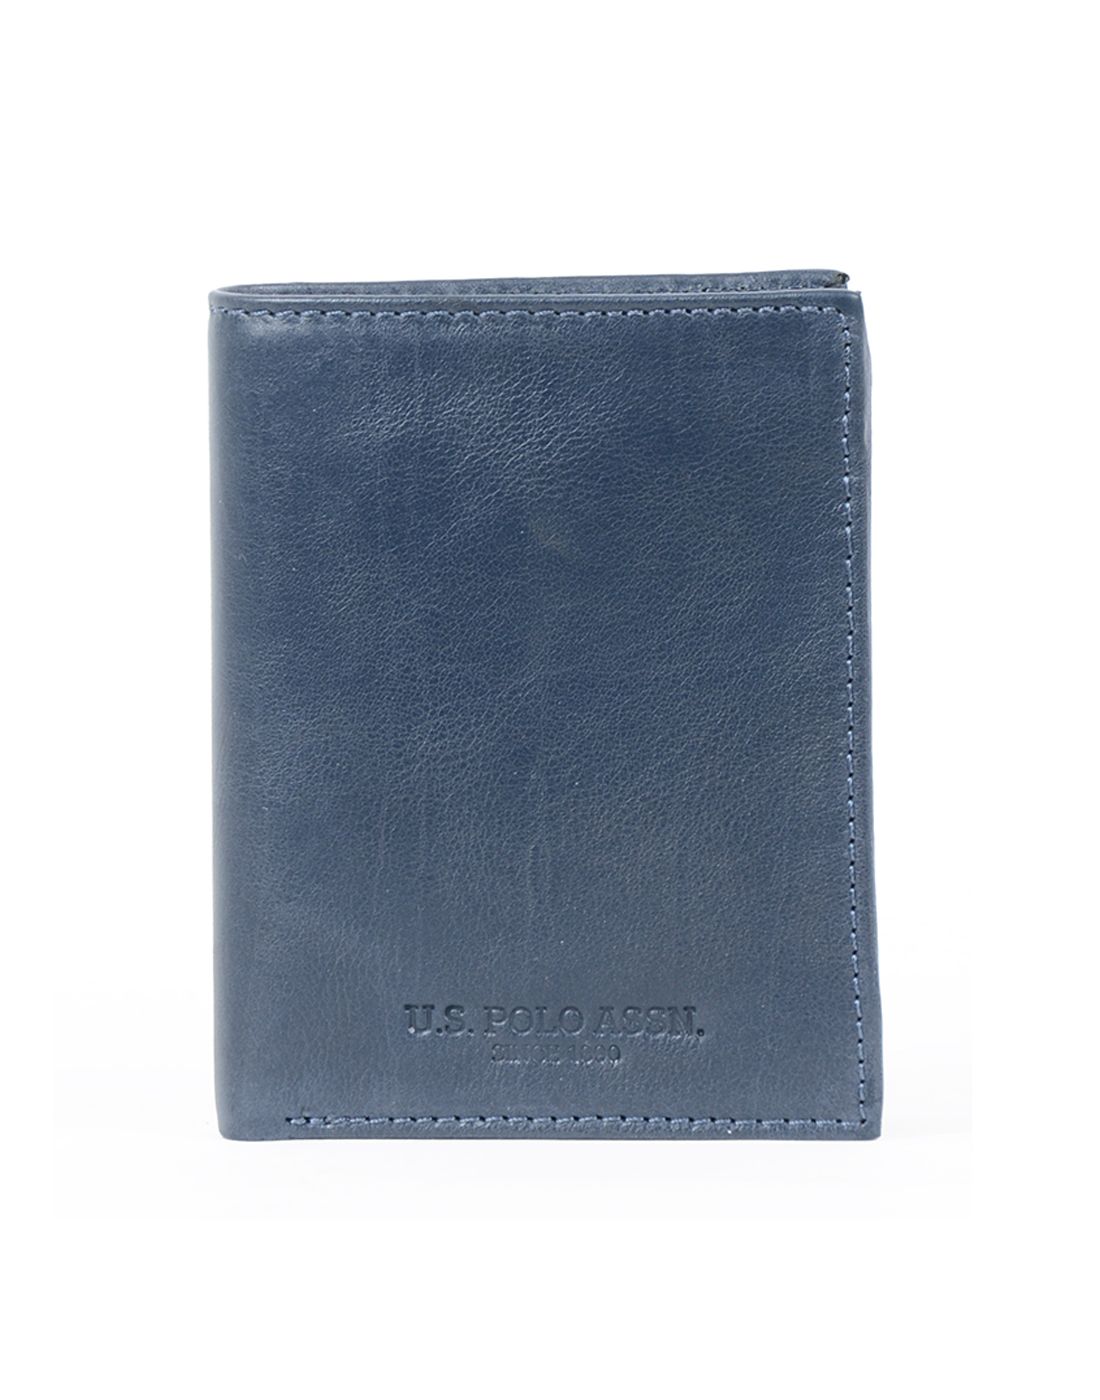 U.S. Polo Assn. Leather Navy Casual Regular Wallet: Buy Online at Low